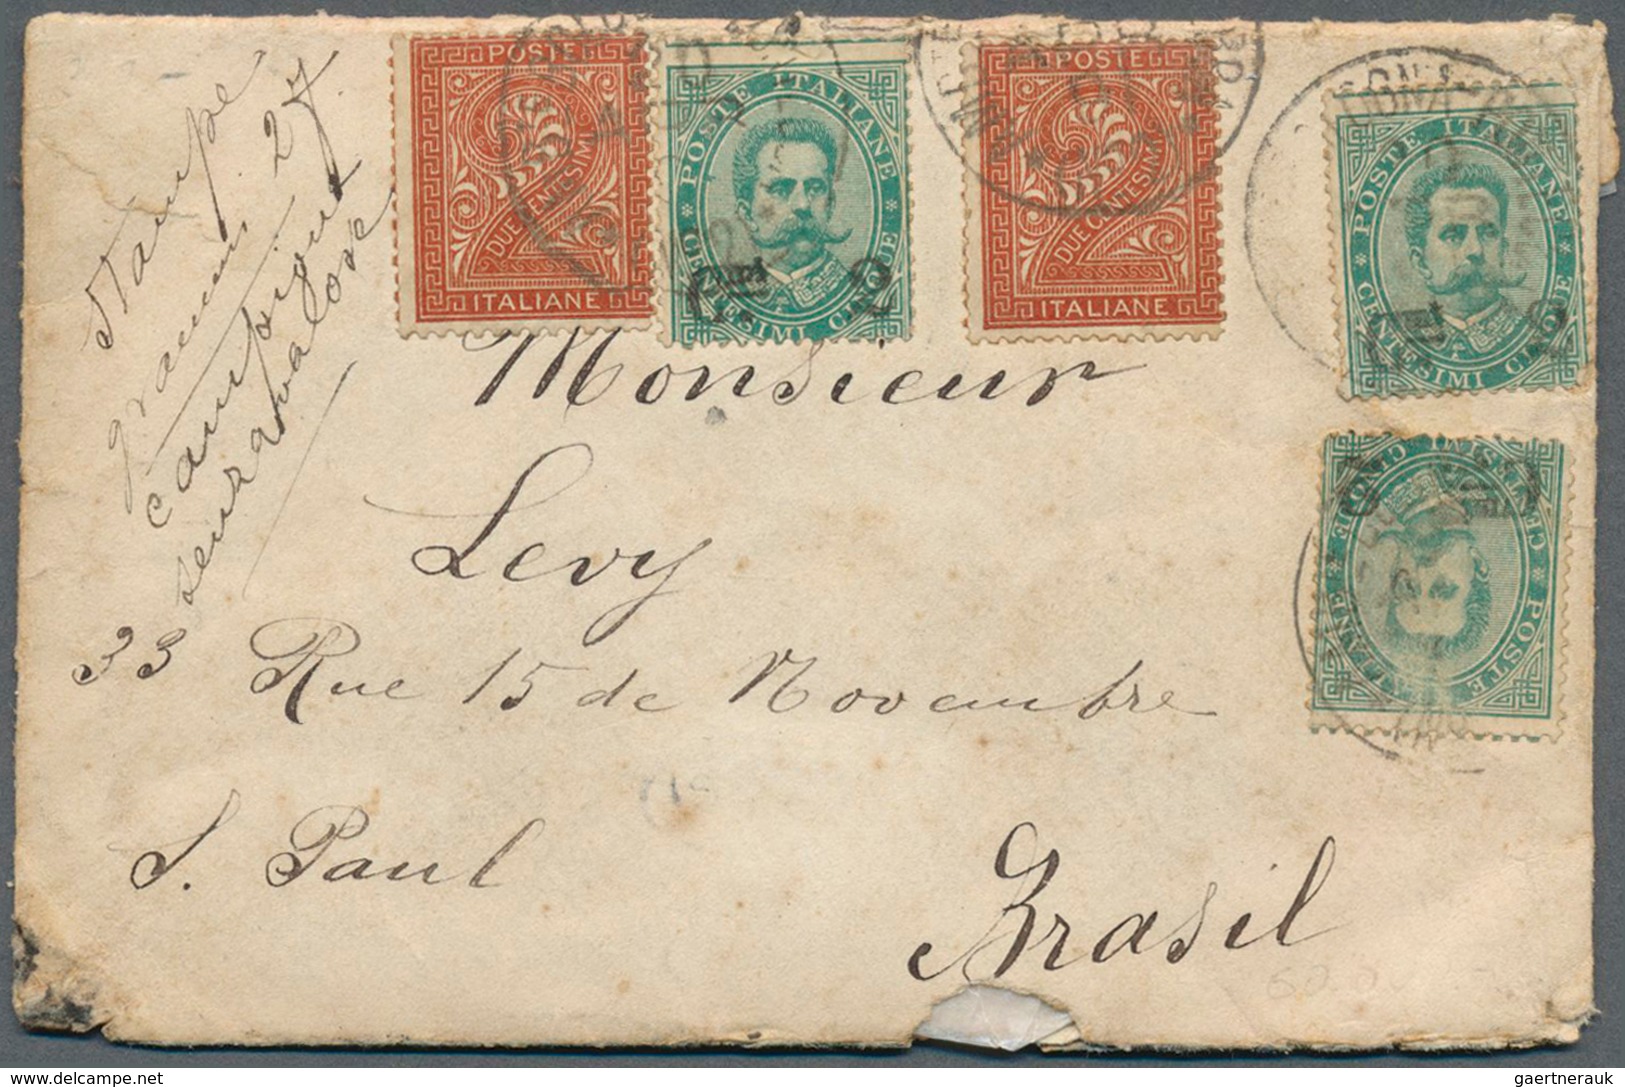 Italien: 1891. Letter With Three Times 2c On 5 Cmi King Umberto I And Two Times 2c Cipher From "Bolo - Colecciones